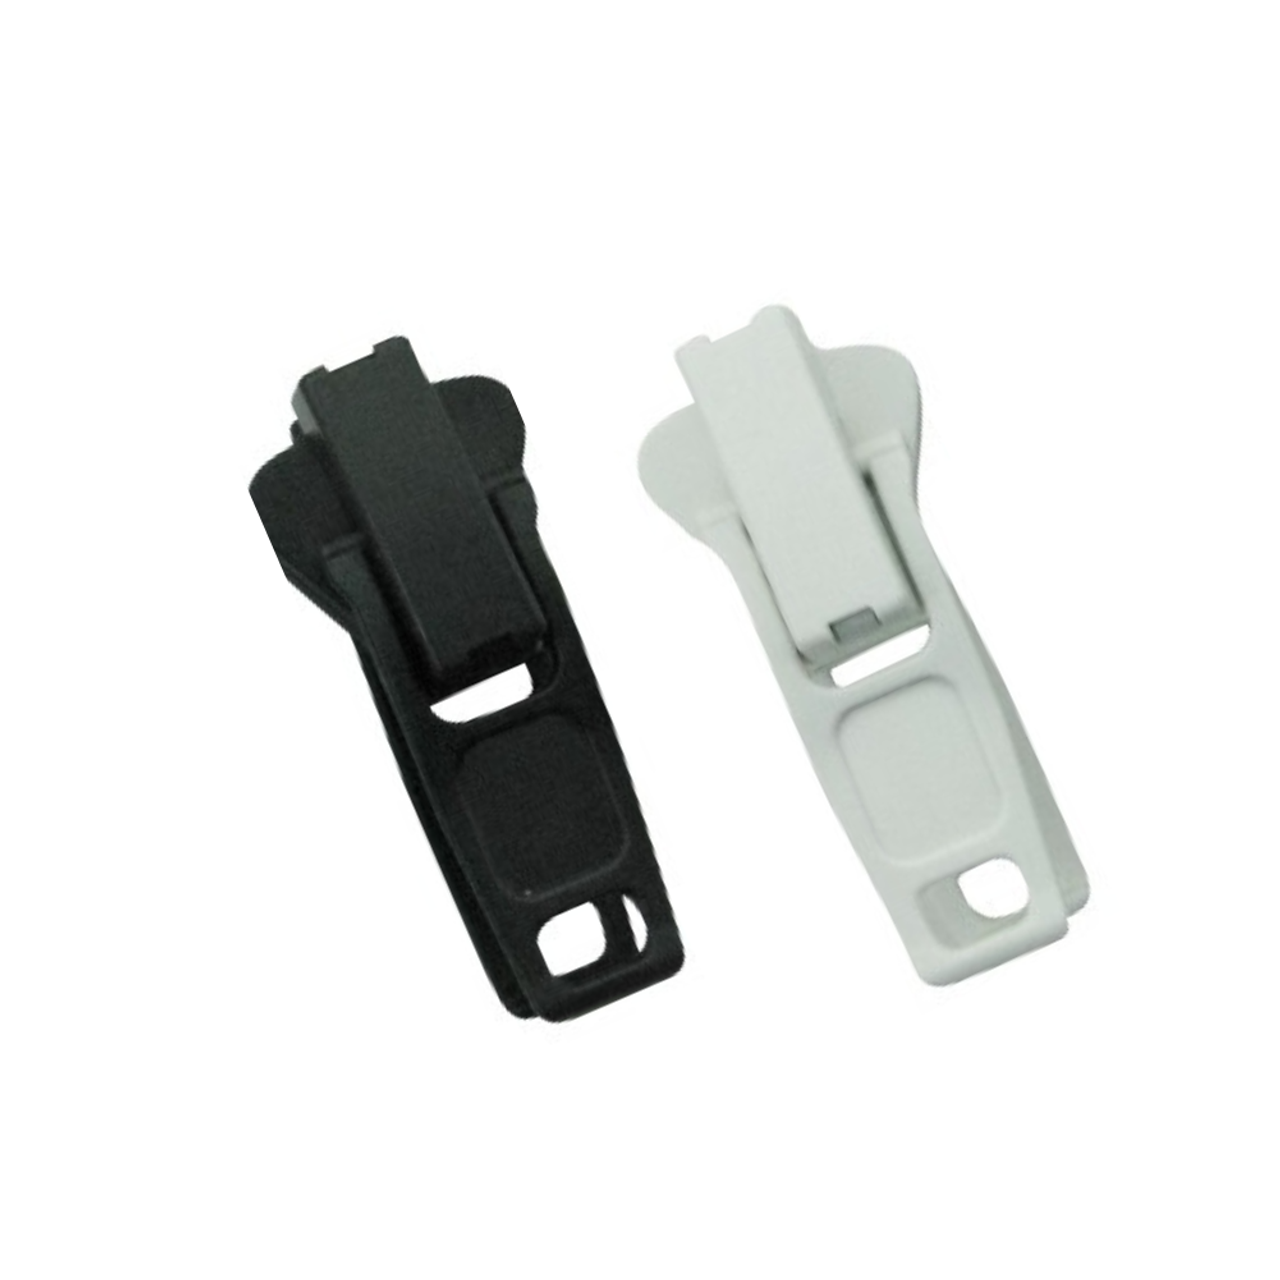 #10 YKK CN Double Pull Zipper Slider. These Sliders Are Made for YKK CN Coil. (Qty 10)